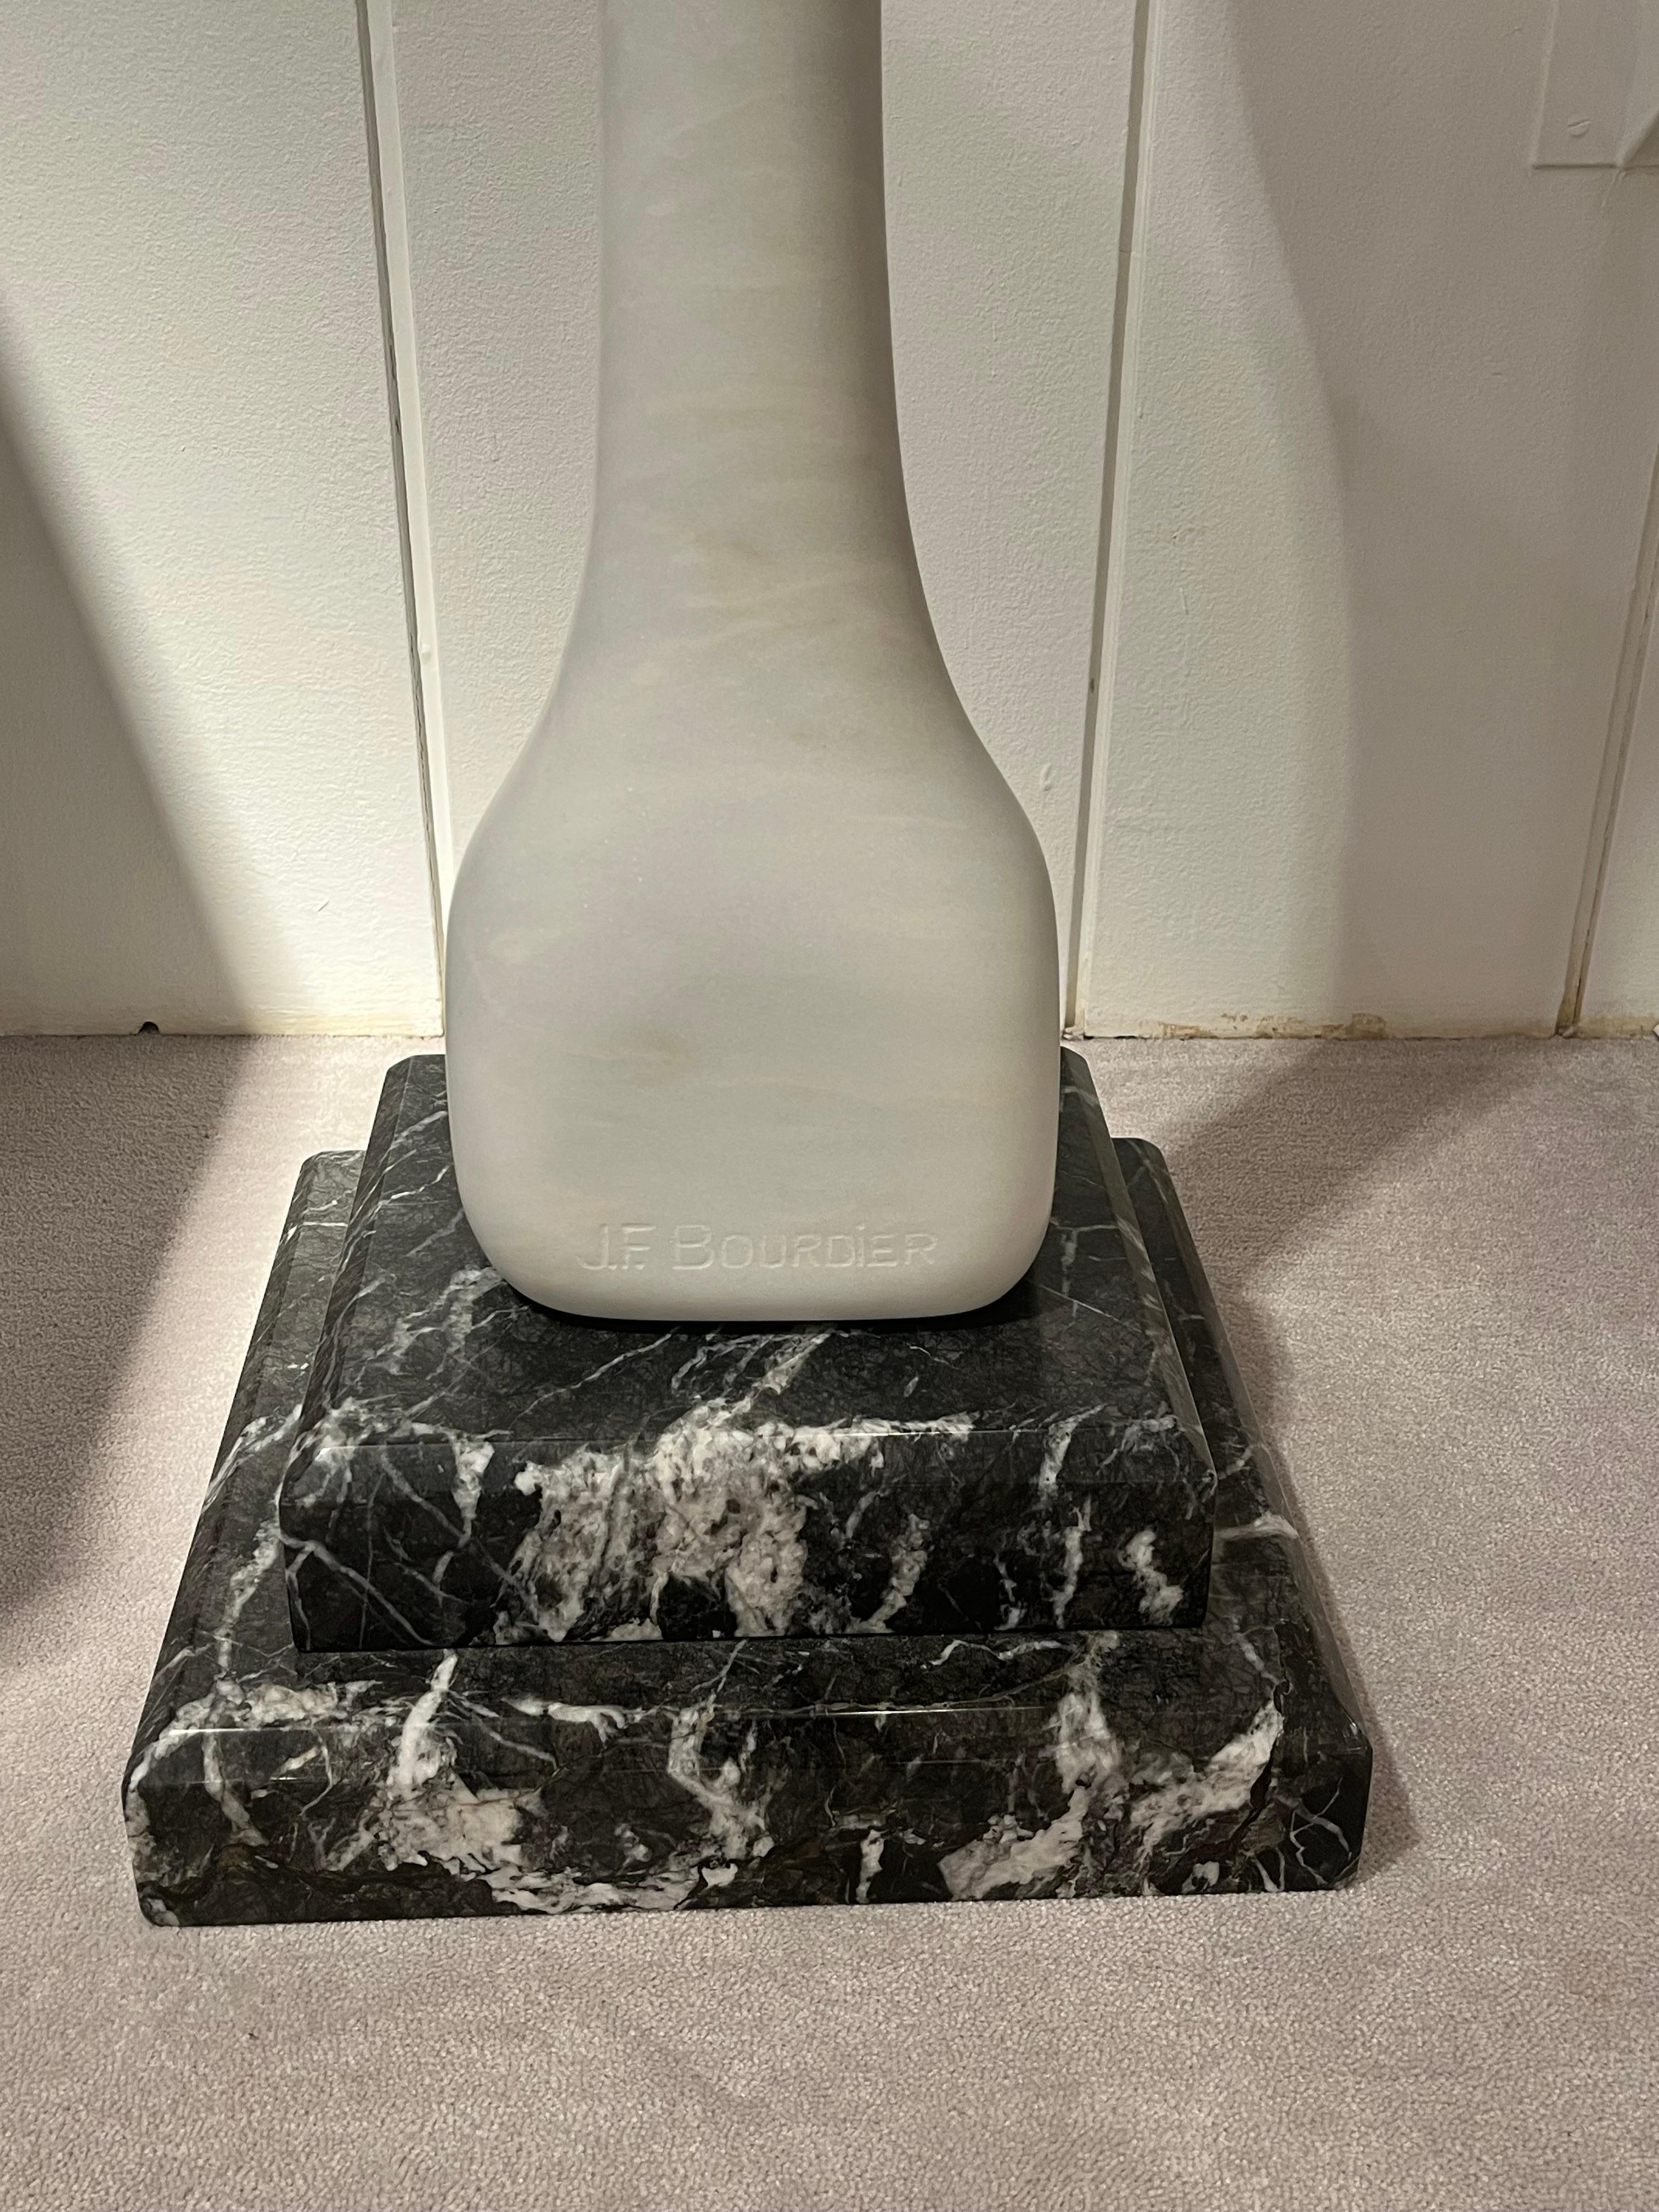 Late 20th Century White Marble Abstract Sculpture by Jean Frederic Bourdier For Sale